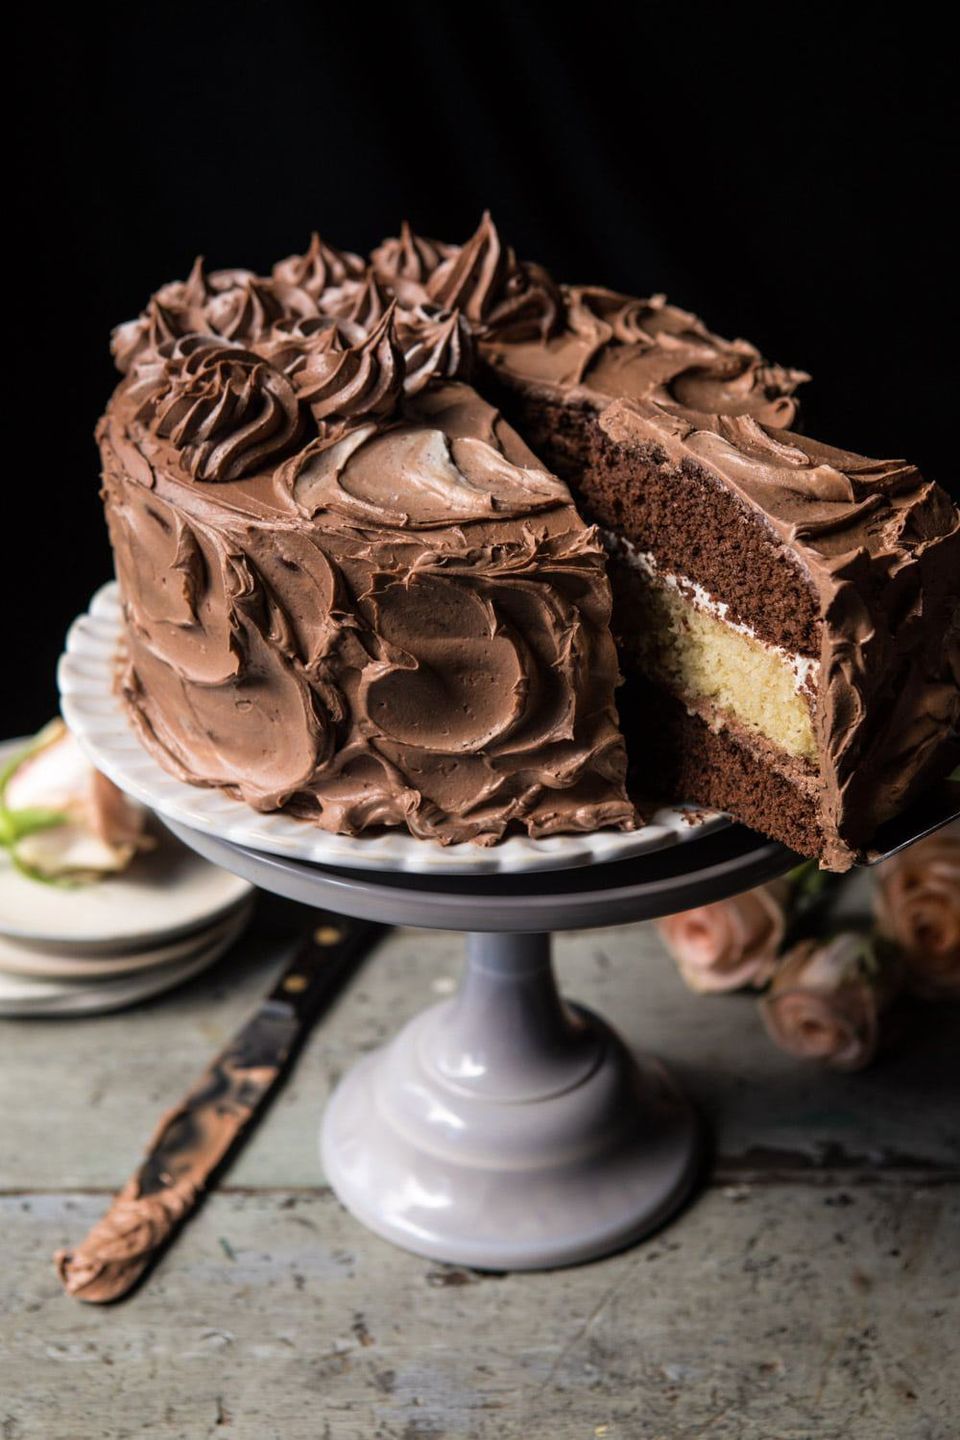 The 50 All-Time Best Cake Recipes | HuffPost Life